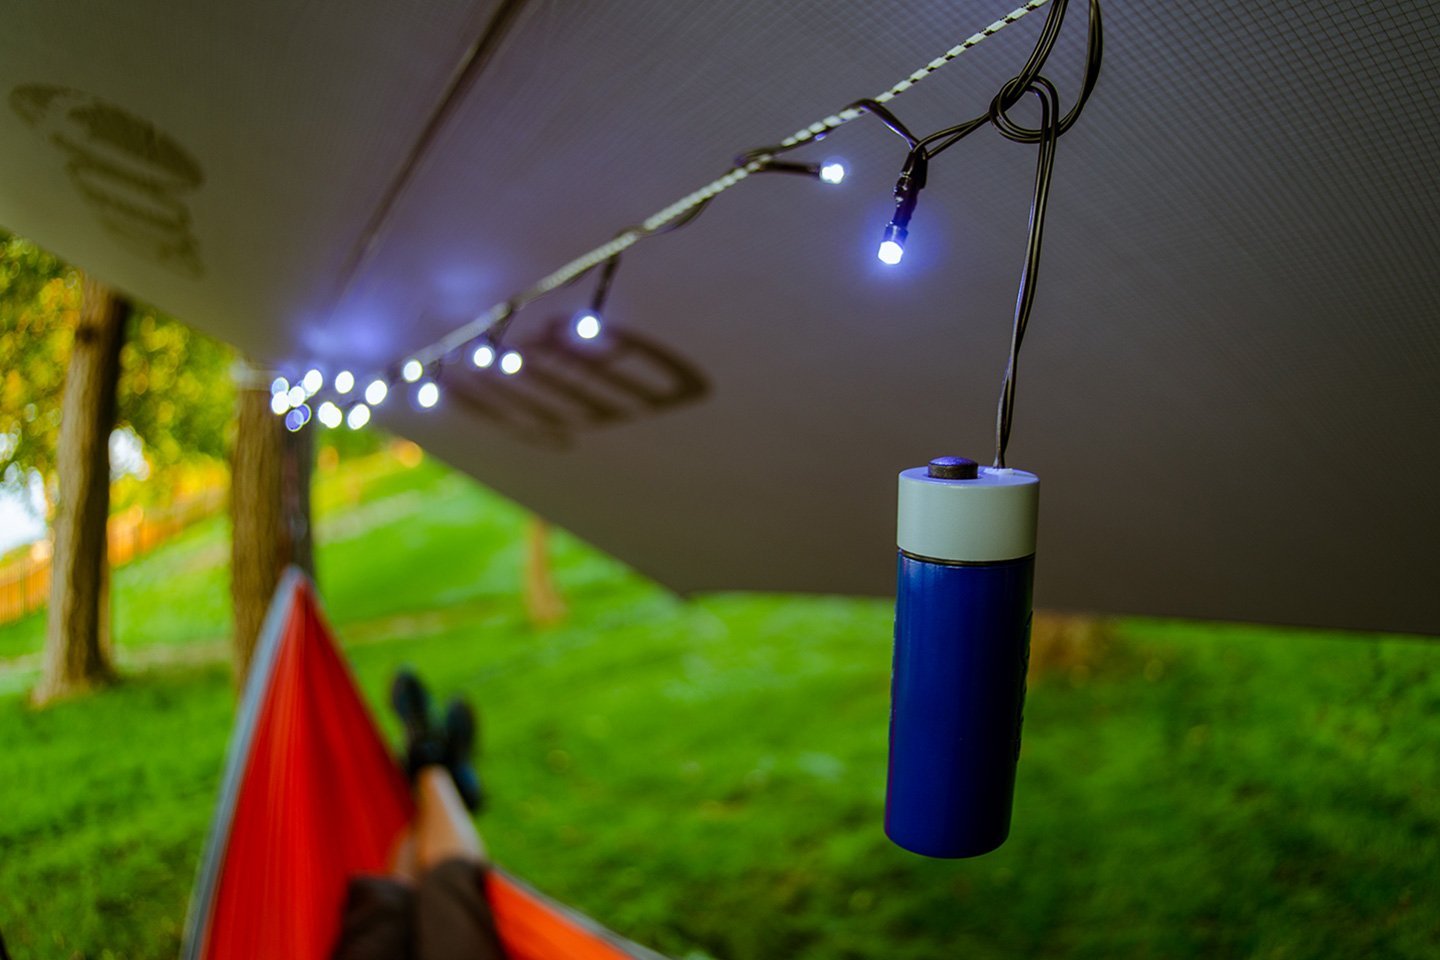 Eno Eagles Nest Outfitters-Twilight Blue//Green DEL Light String Camp Lighting